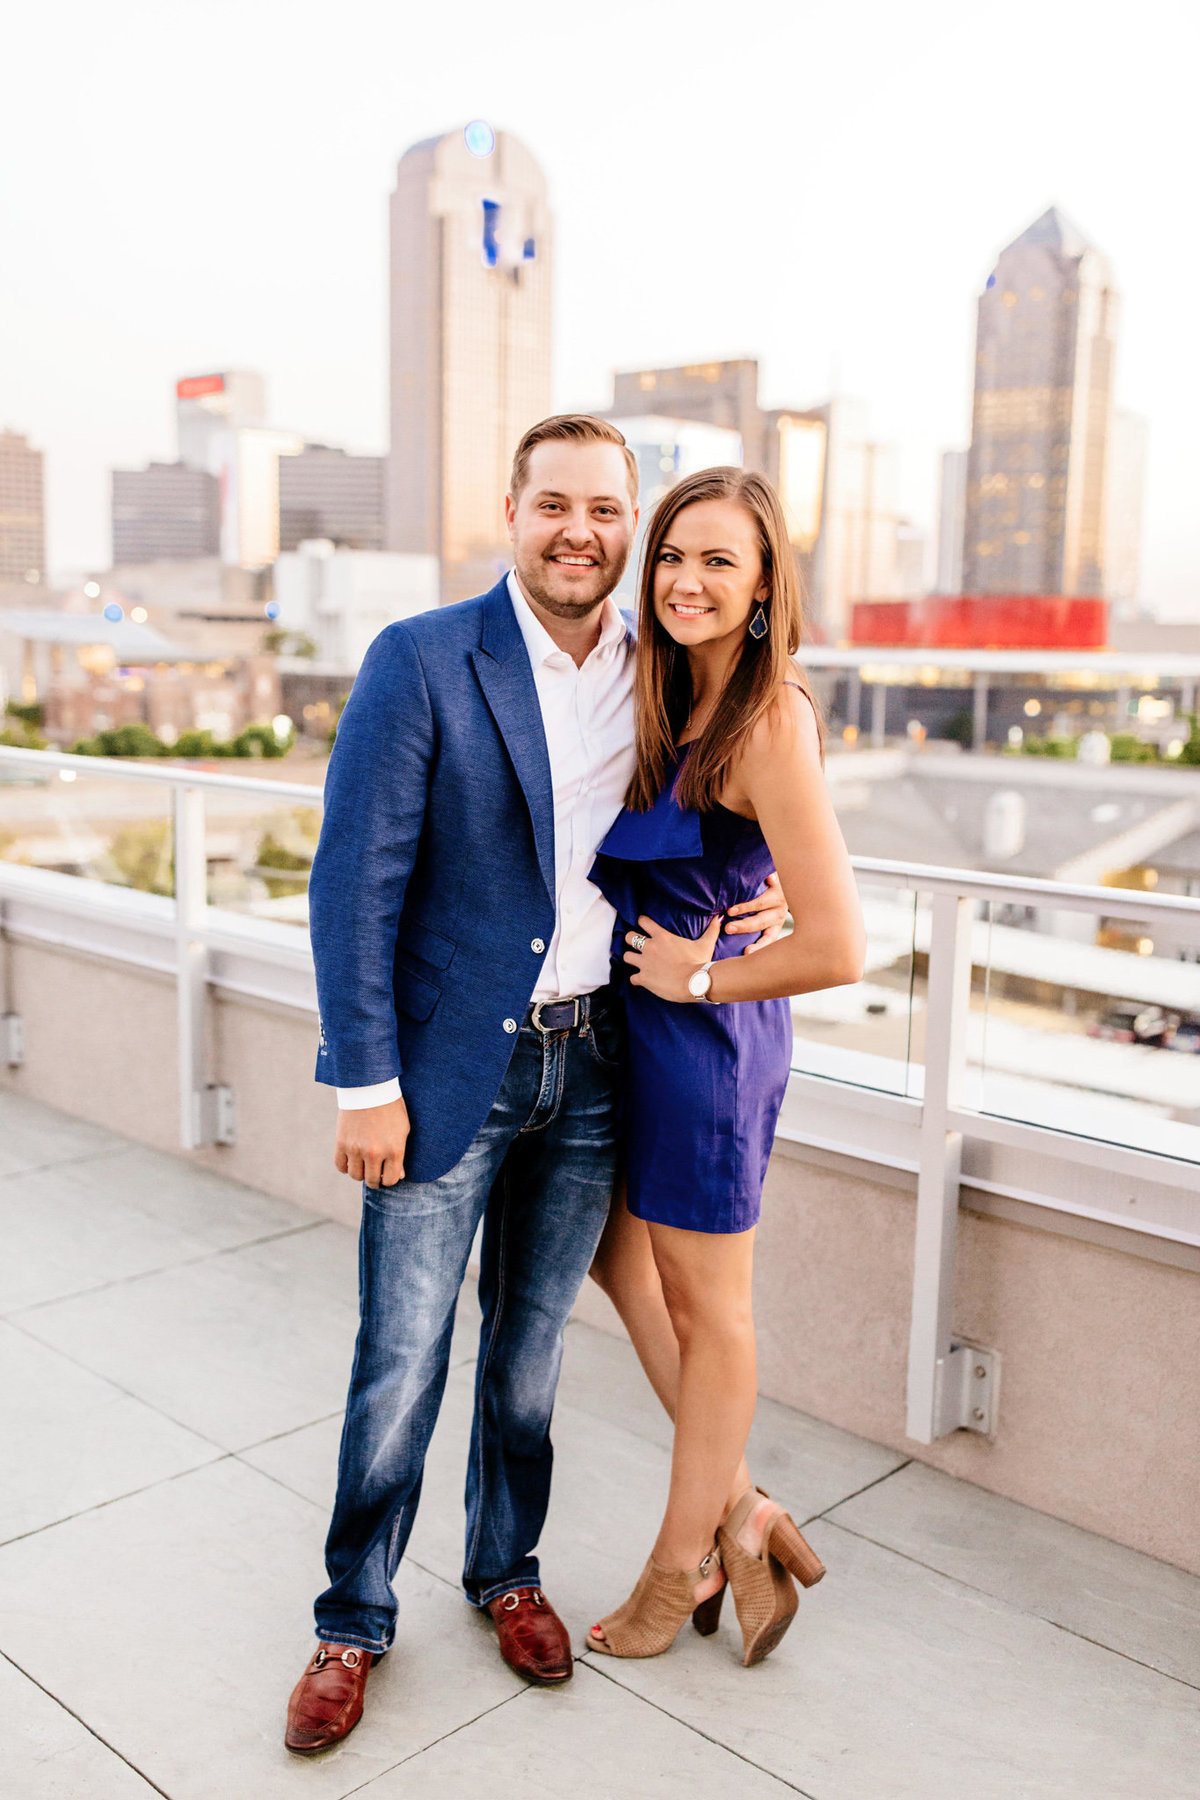 Eric & Megan - Downtown Dallas Rooftop Proposal & Engagement Session-253